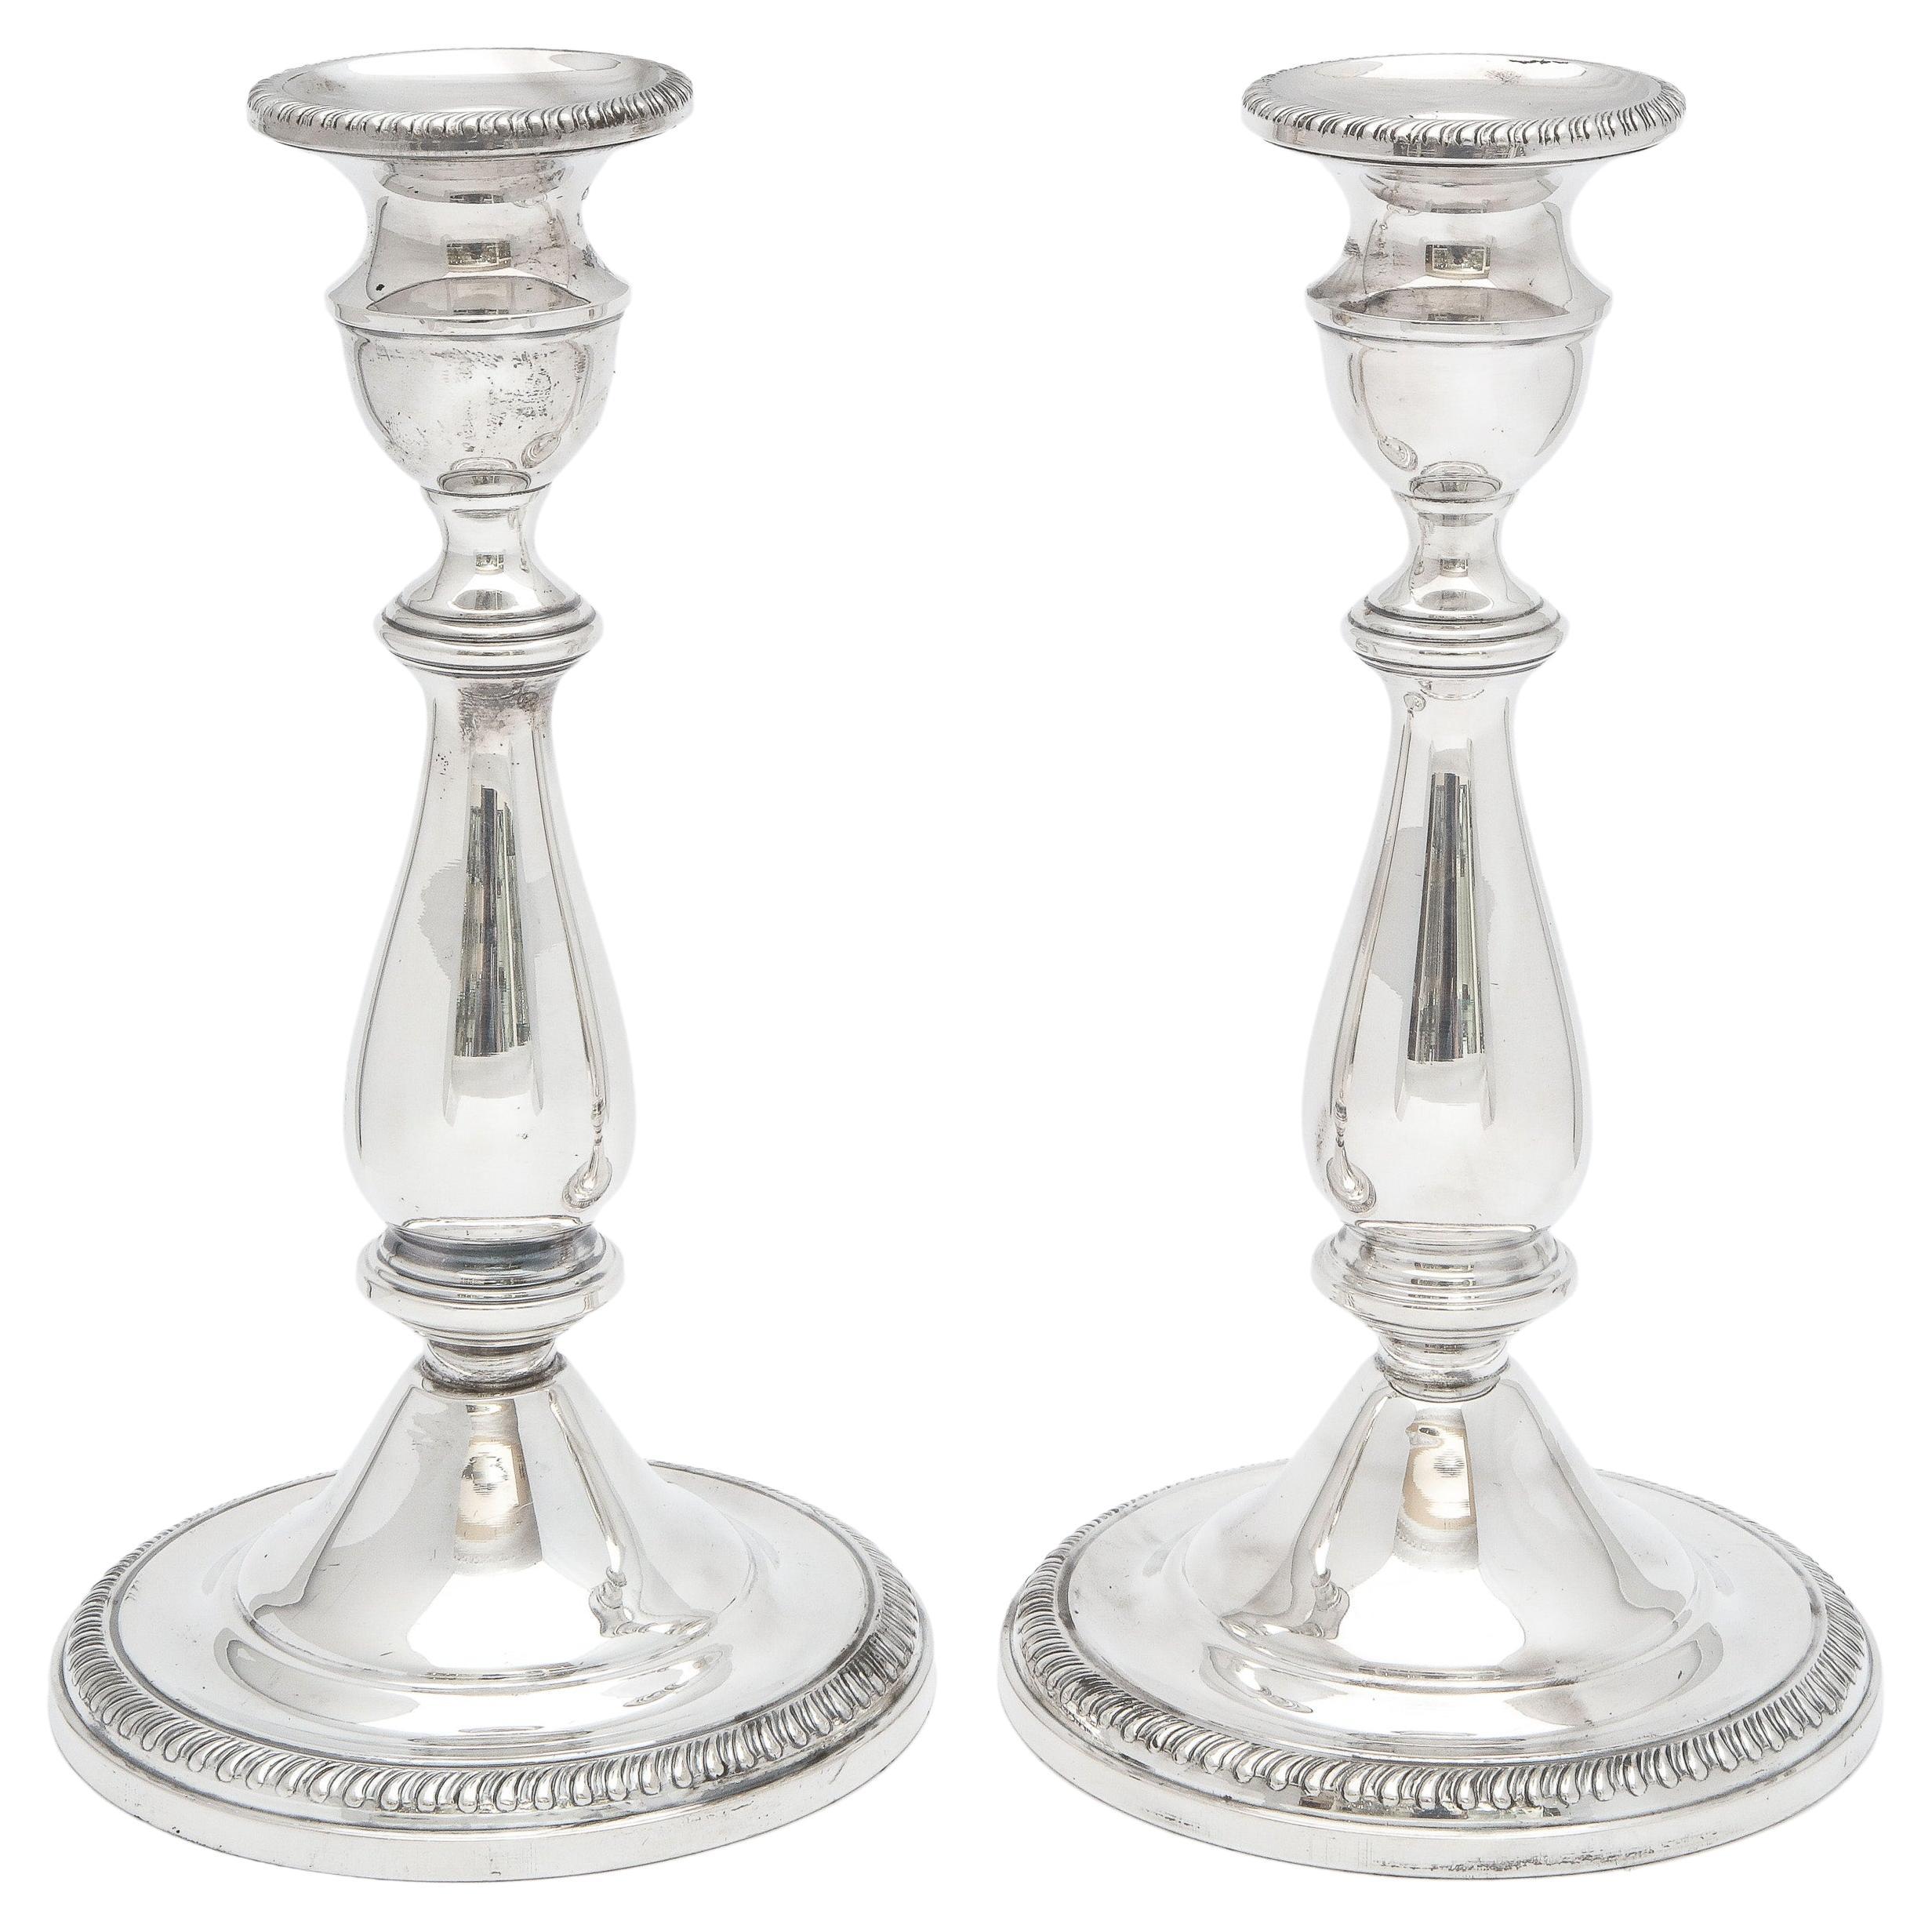 Pair of Tall Neoclassical-Style Sterling Silver Candlesticks